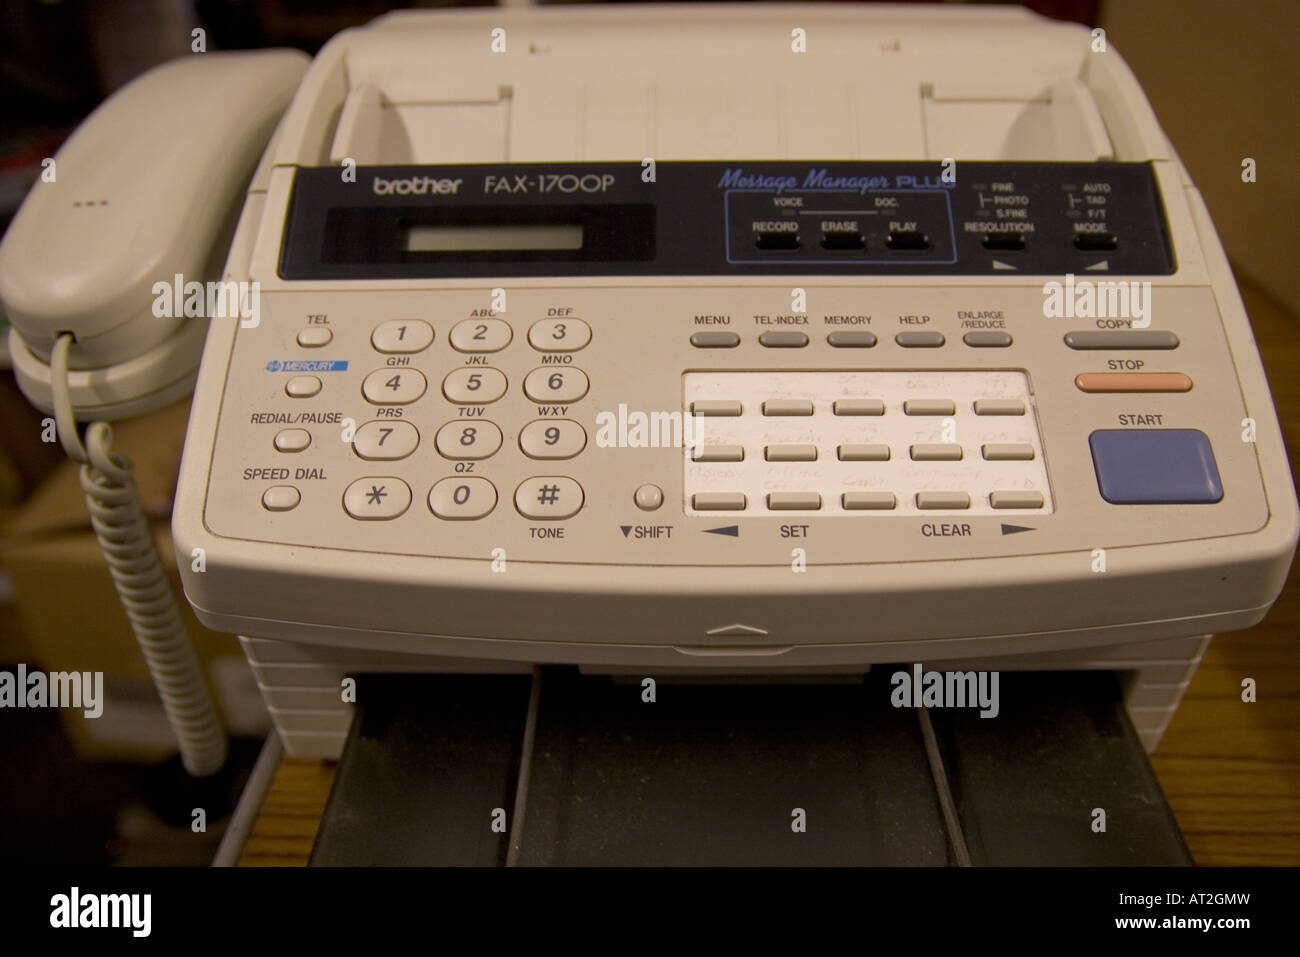 office telephone fax and answering machine Stock Photo